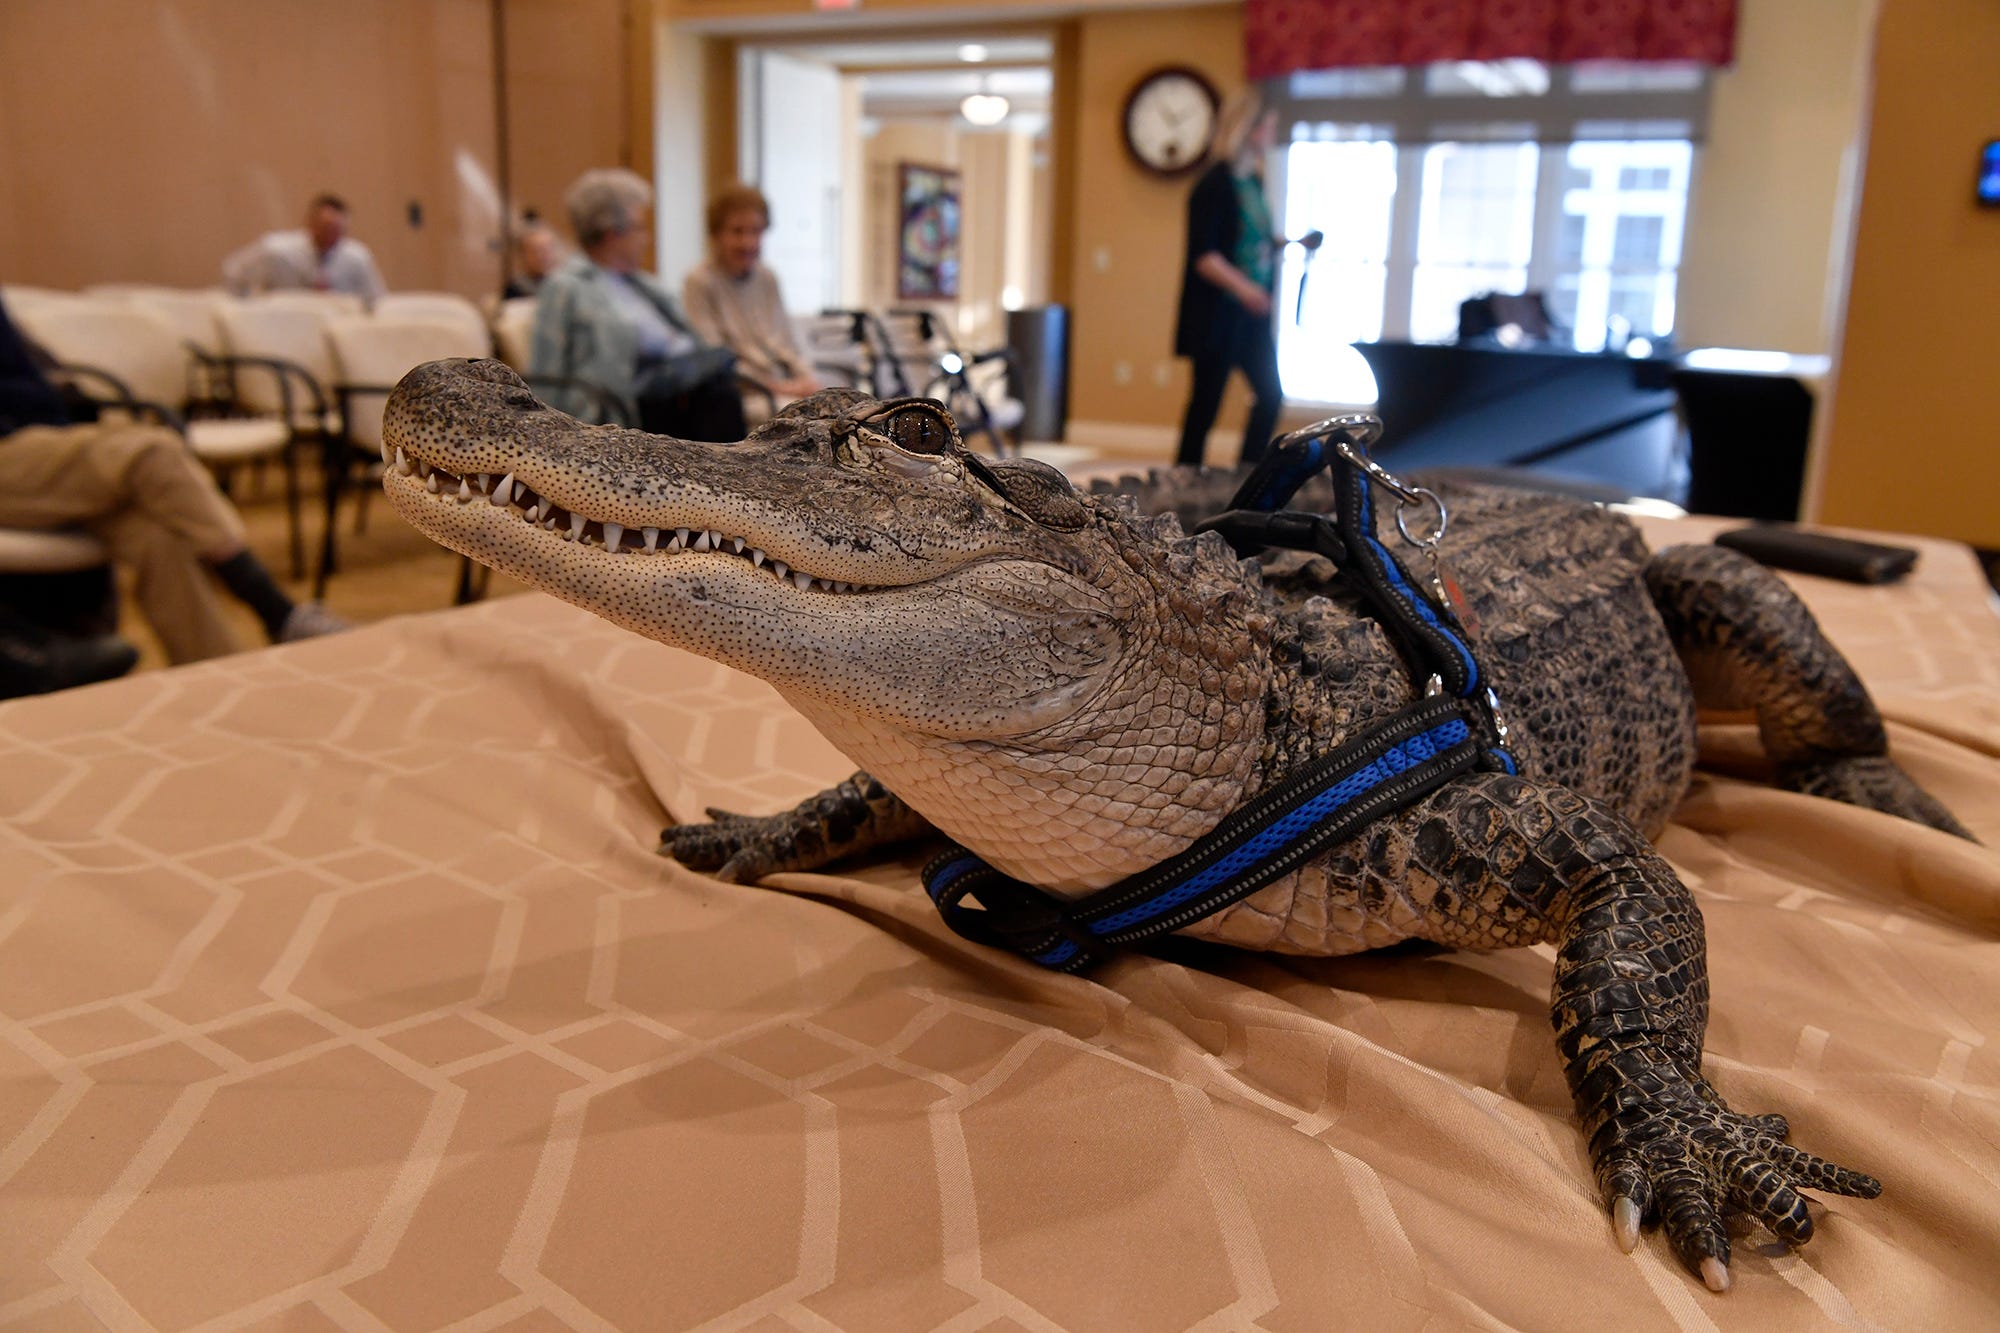 Wally, a five-foot American alligator, hangs out with seniors at SpiriTrust Lutheran Village at Sprenkle Drive, Monday, January 14, 2019.
John A. Pavoncello photo